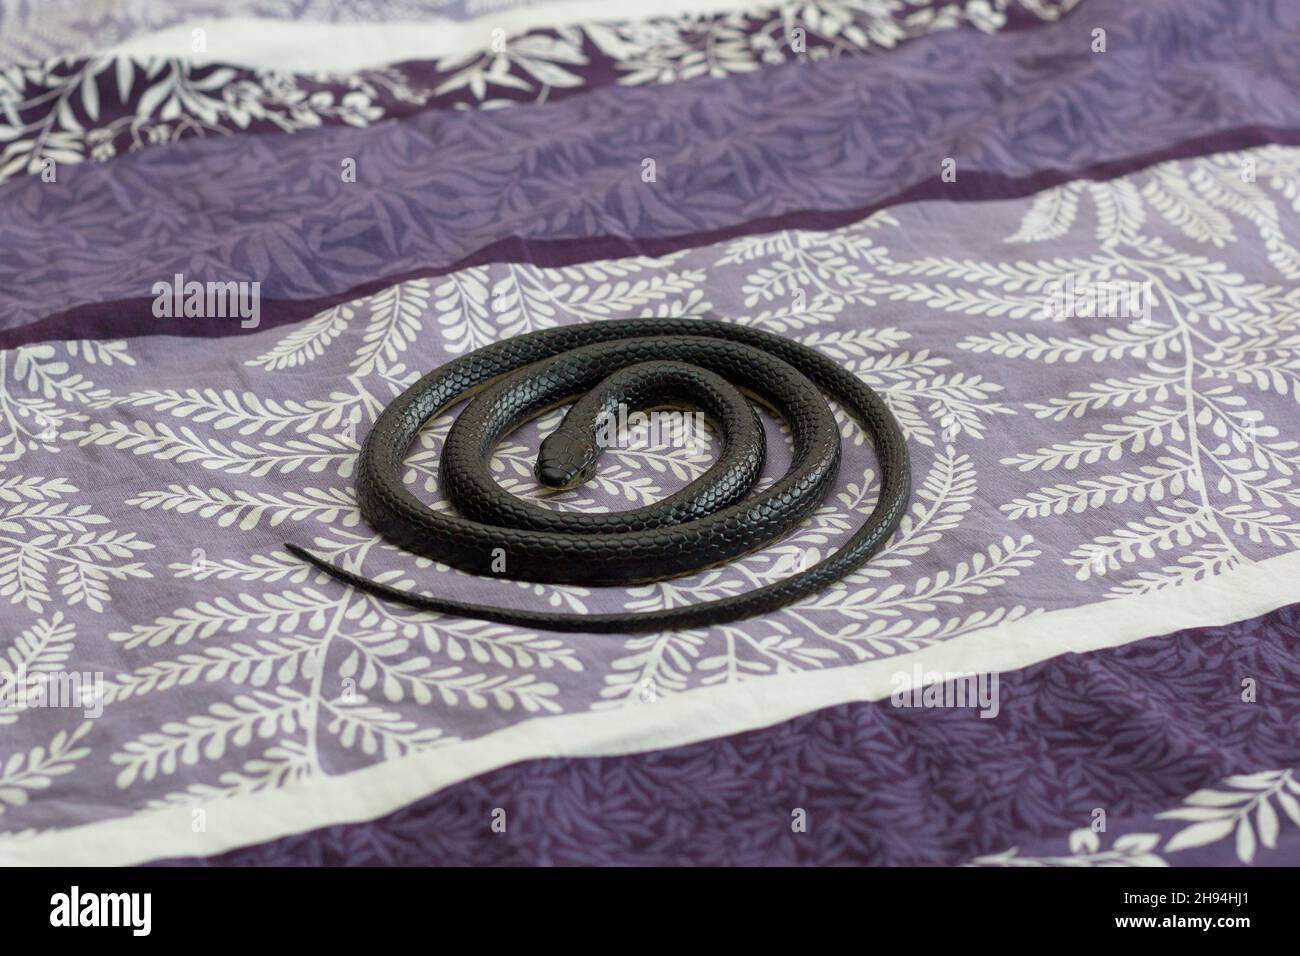 A black poisonous snake crawling into the apartment in the bedroom on the bed. Stock Photo